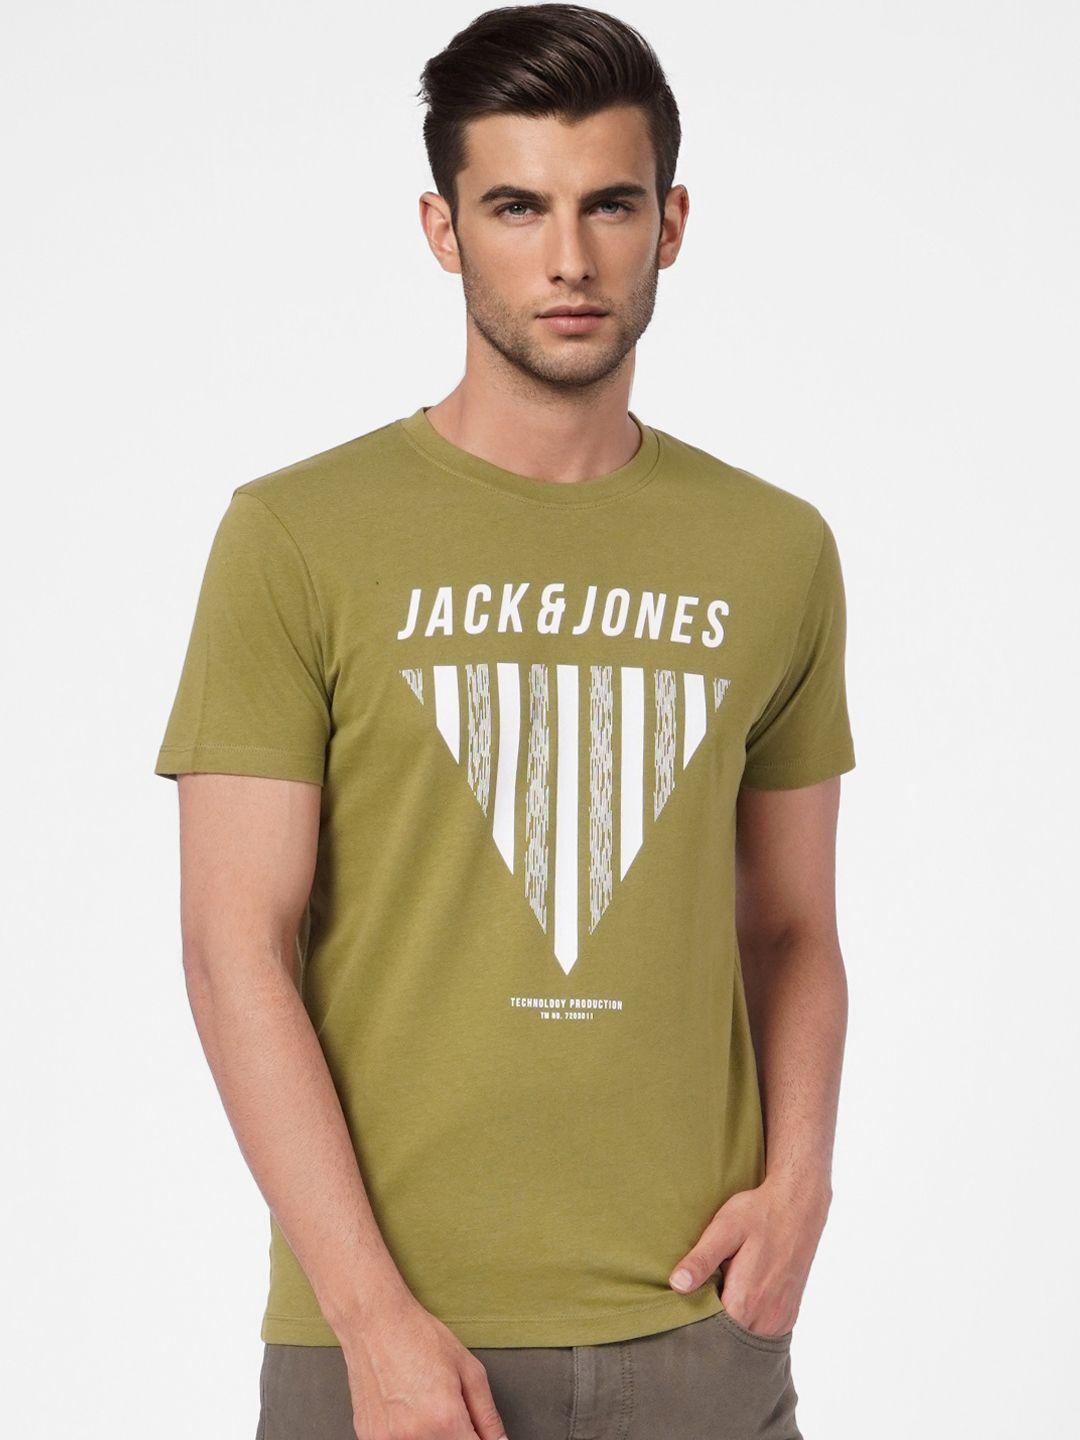 jack & jones men olive green & off white printed slim fit pure cotton casual t-shirt